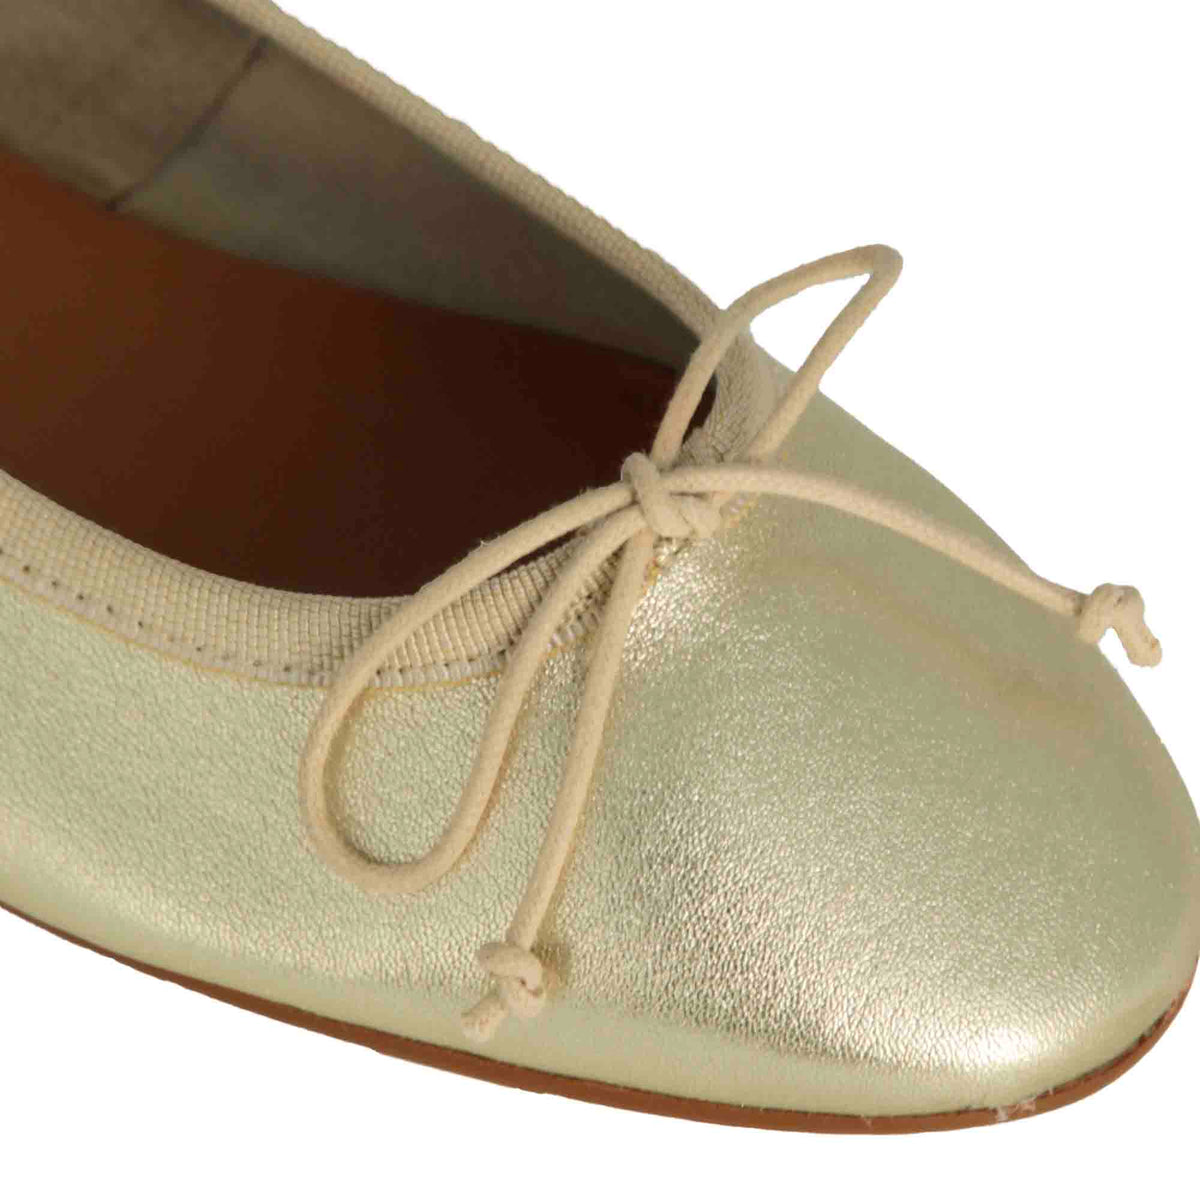 Classic women's ballet flat in gold-coloured laminated leather